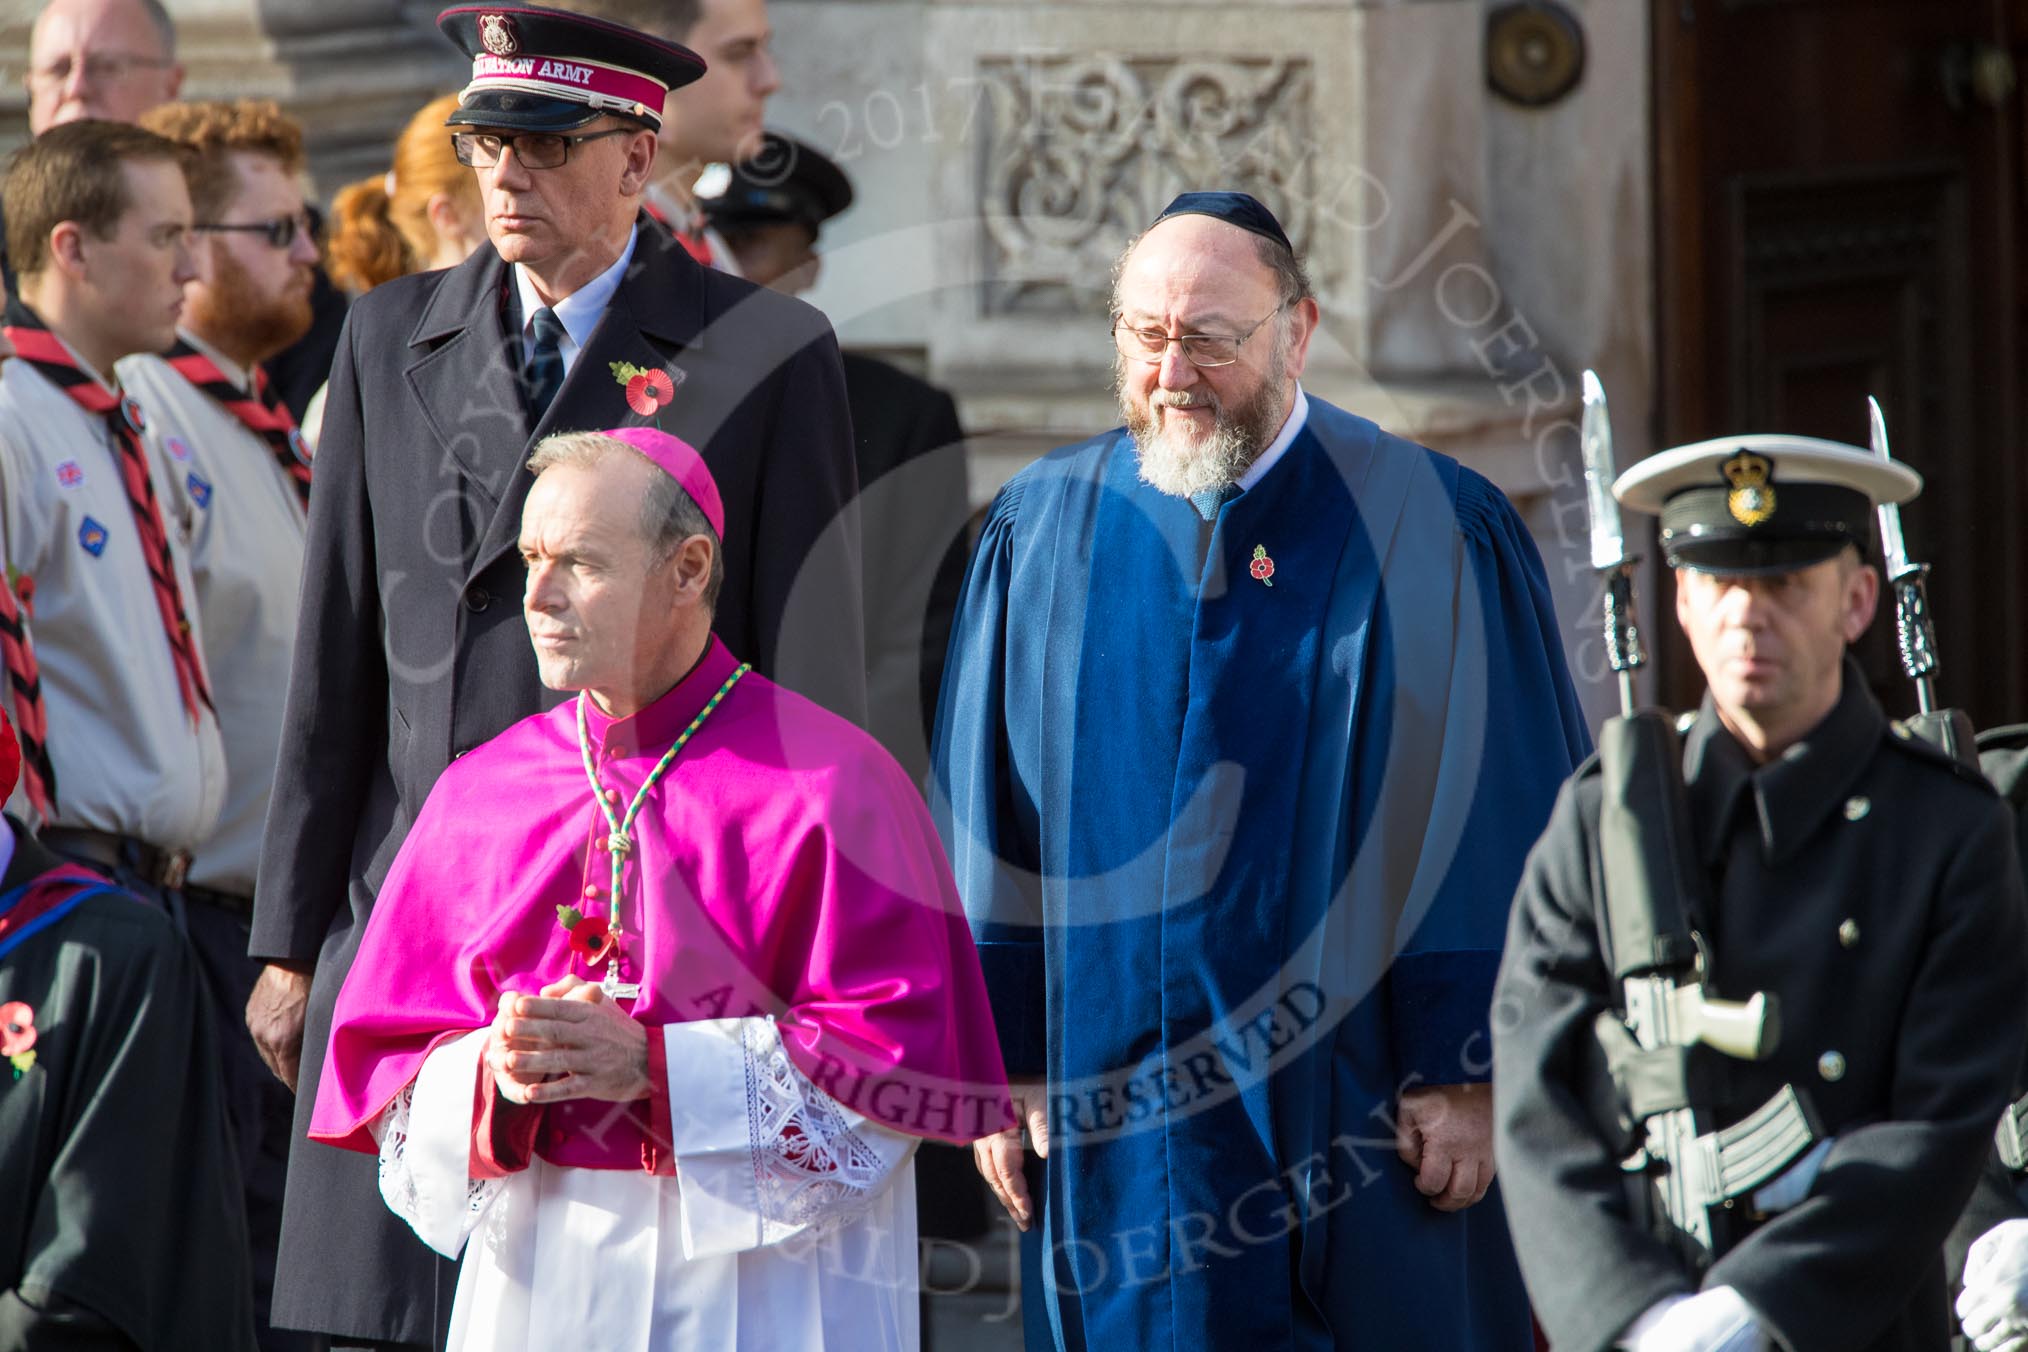 The representatives of the faith communities during the  Remembrance Sunday Cenotaph Ceremony 2018 at Horse Guards Parade, Westminster, London, 11 November 2018, 10:57.